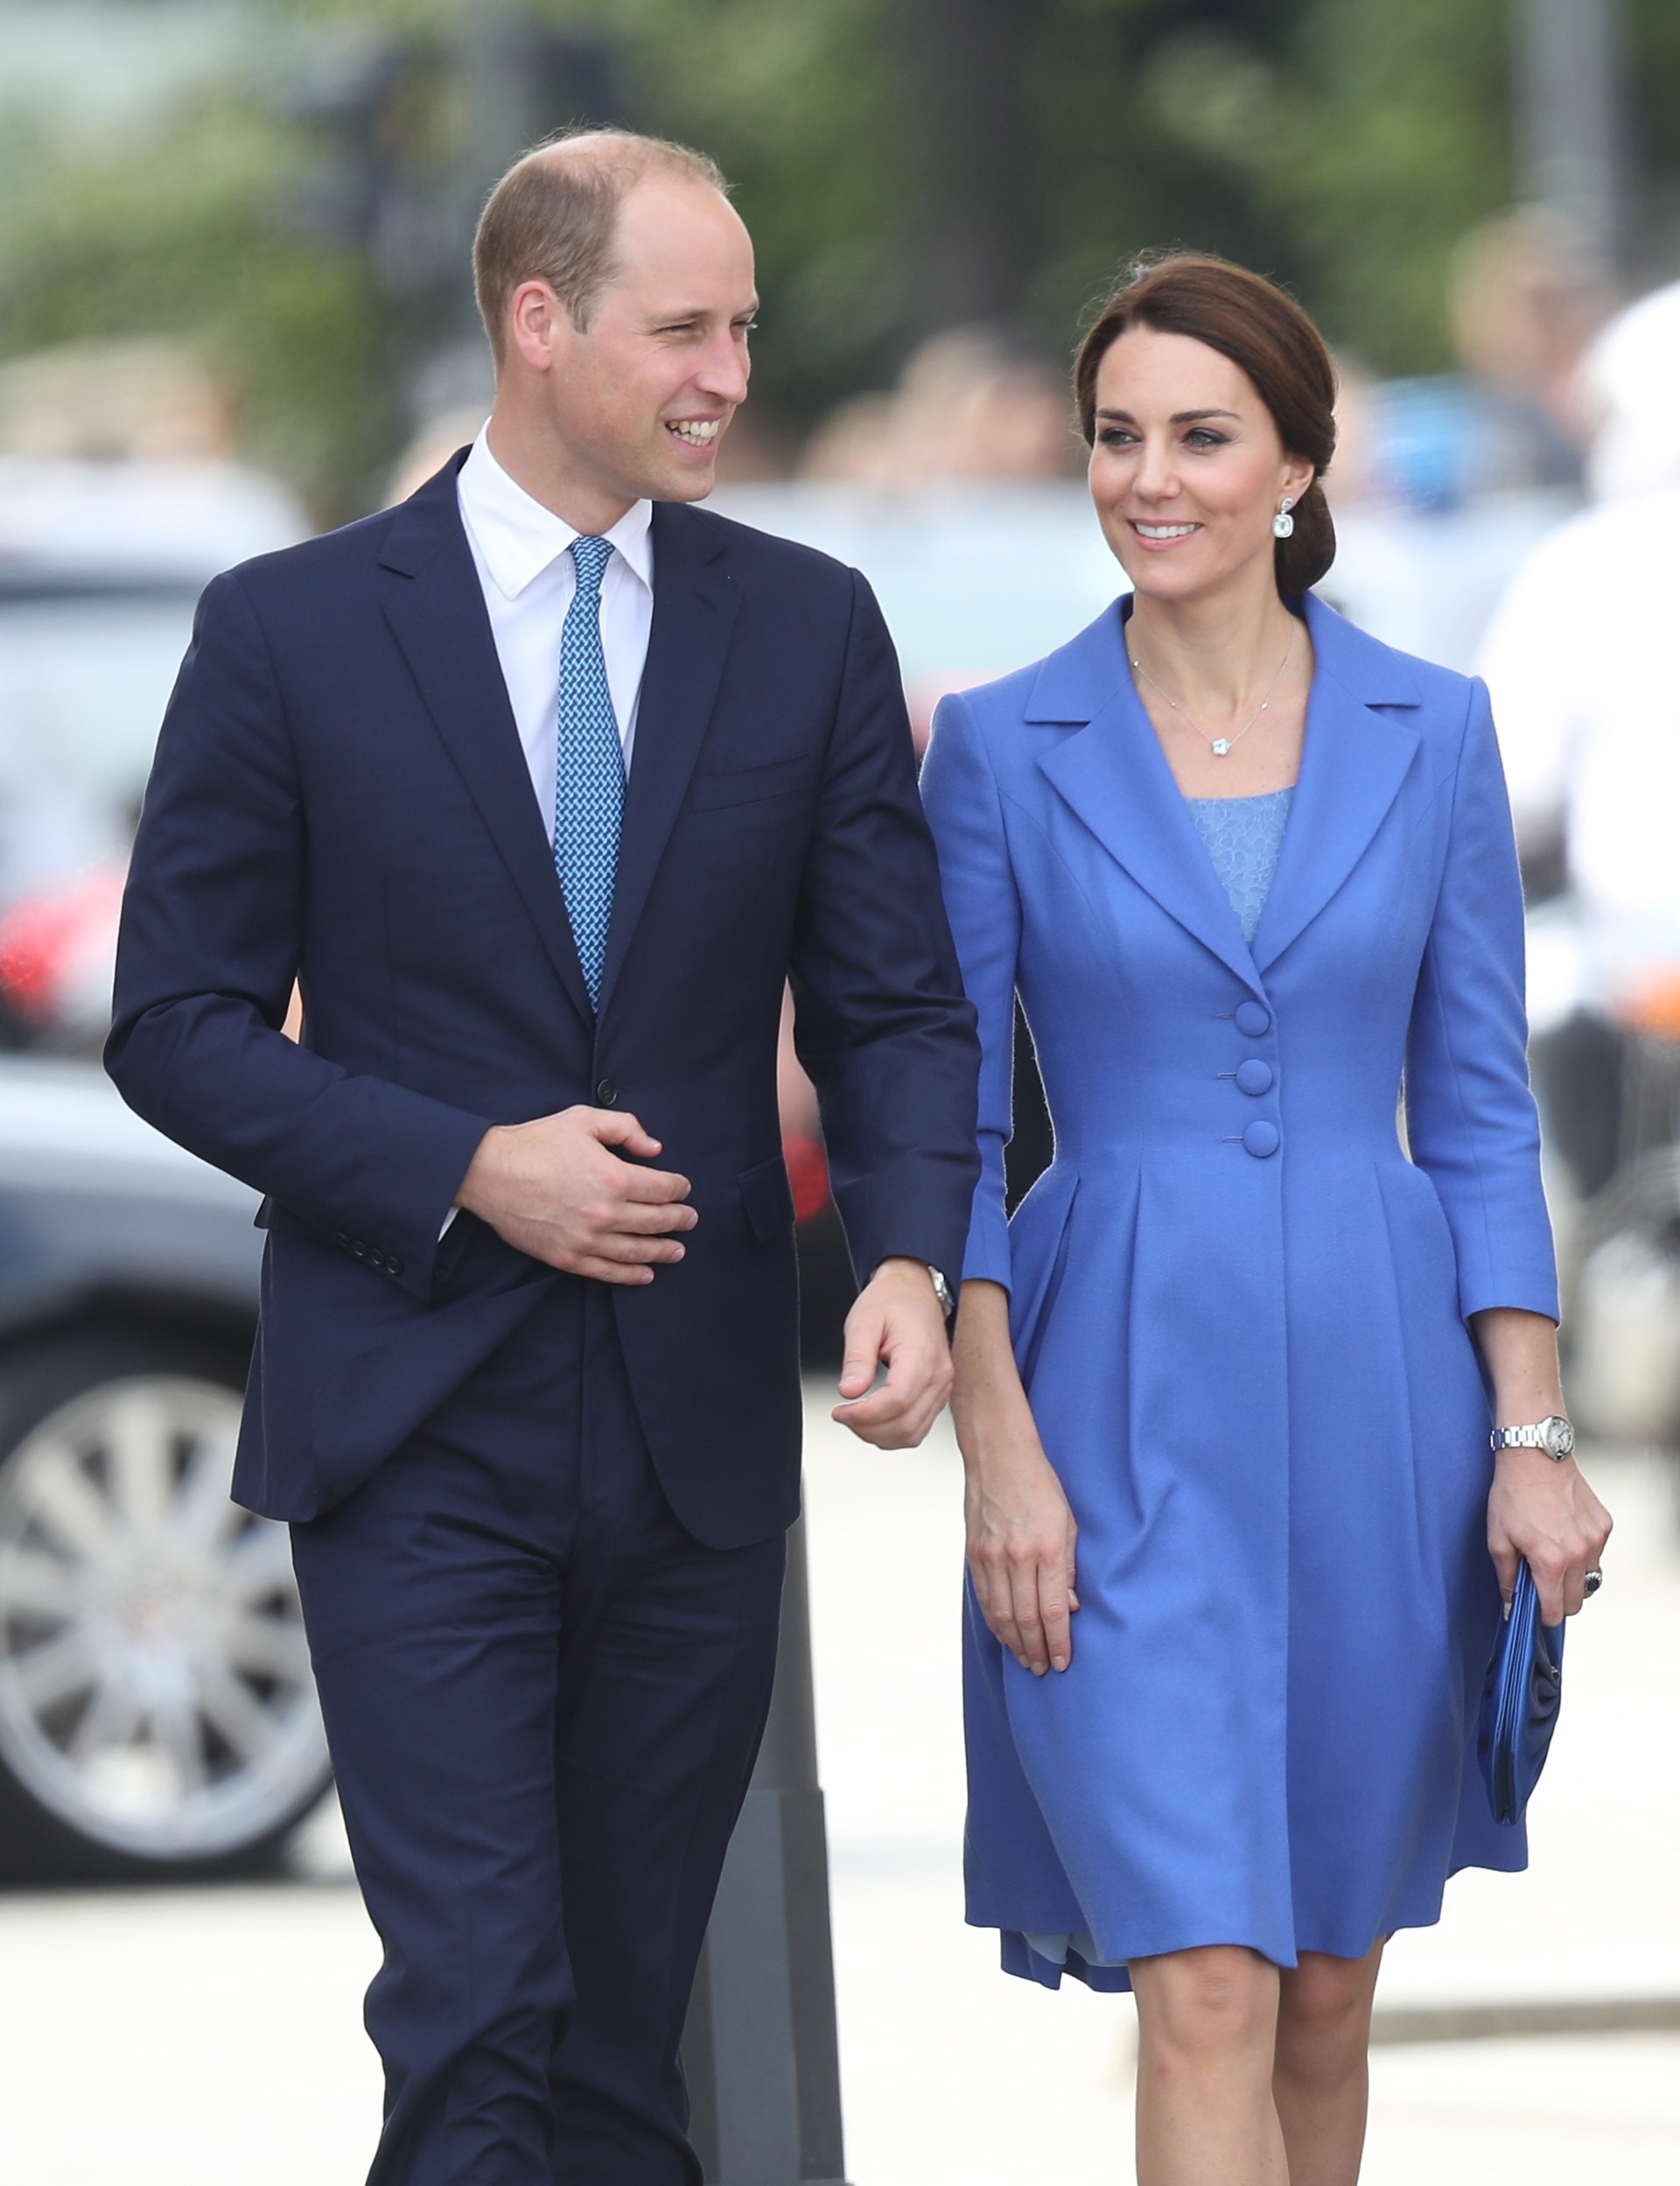 Kate Middleton Wears Patterned Pants from the Gap to Meet a “Baby